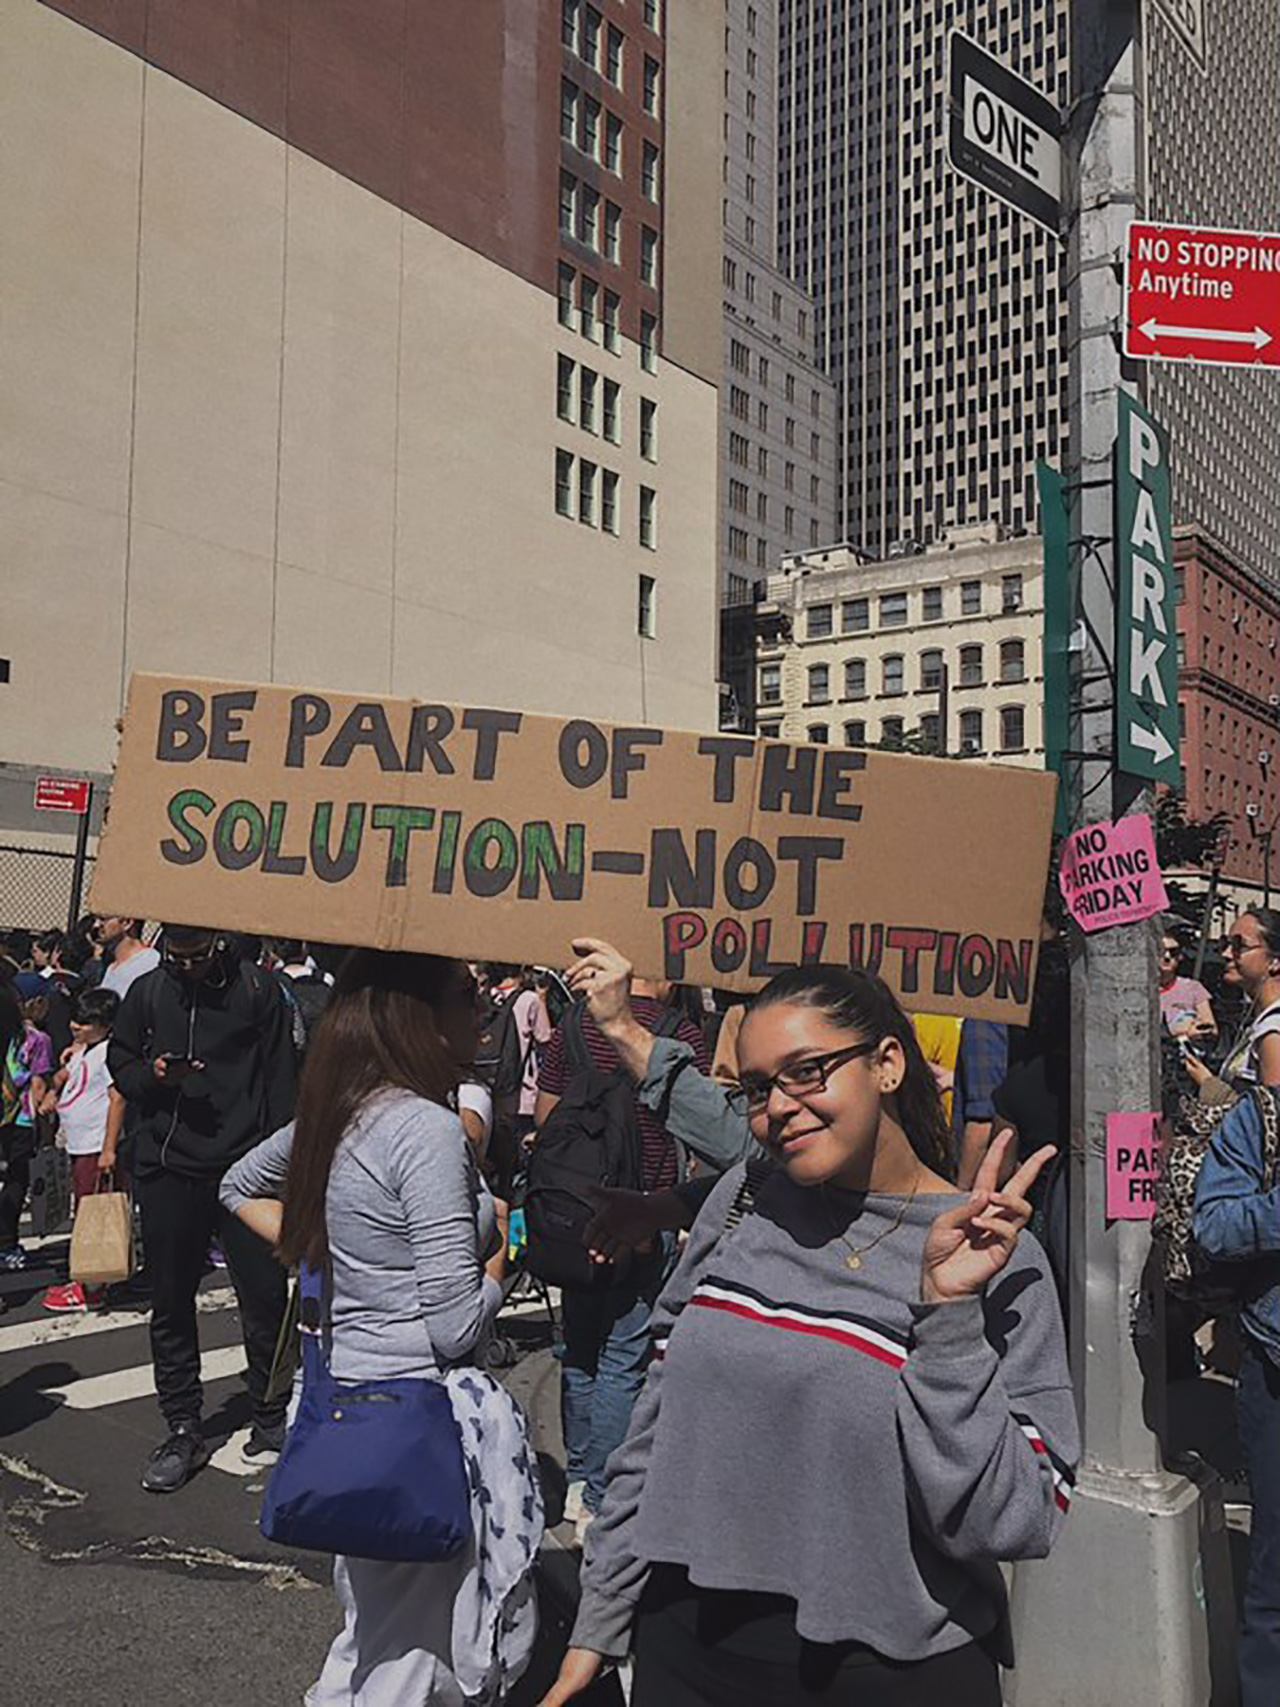 Alexia Leclercq offering a peace sign in front of a “Be part of the solution—not pollution